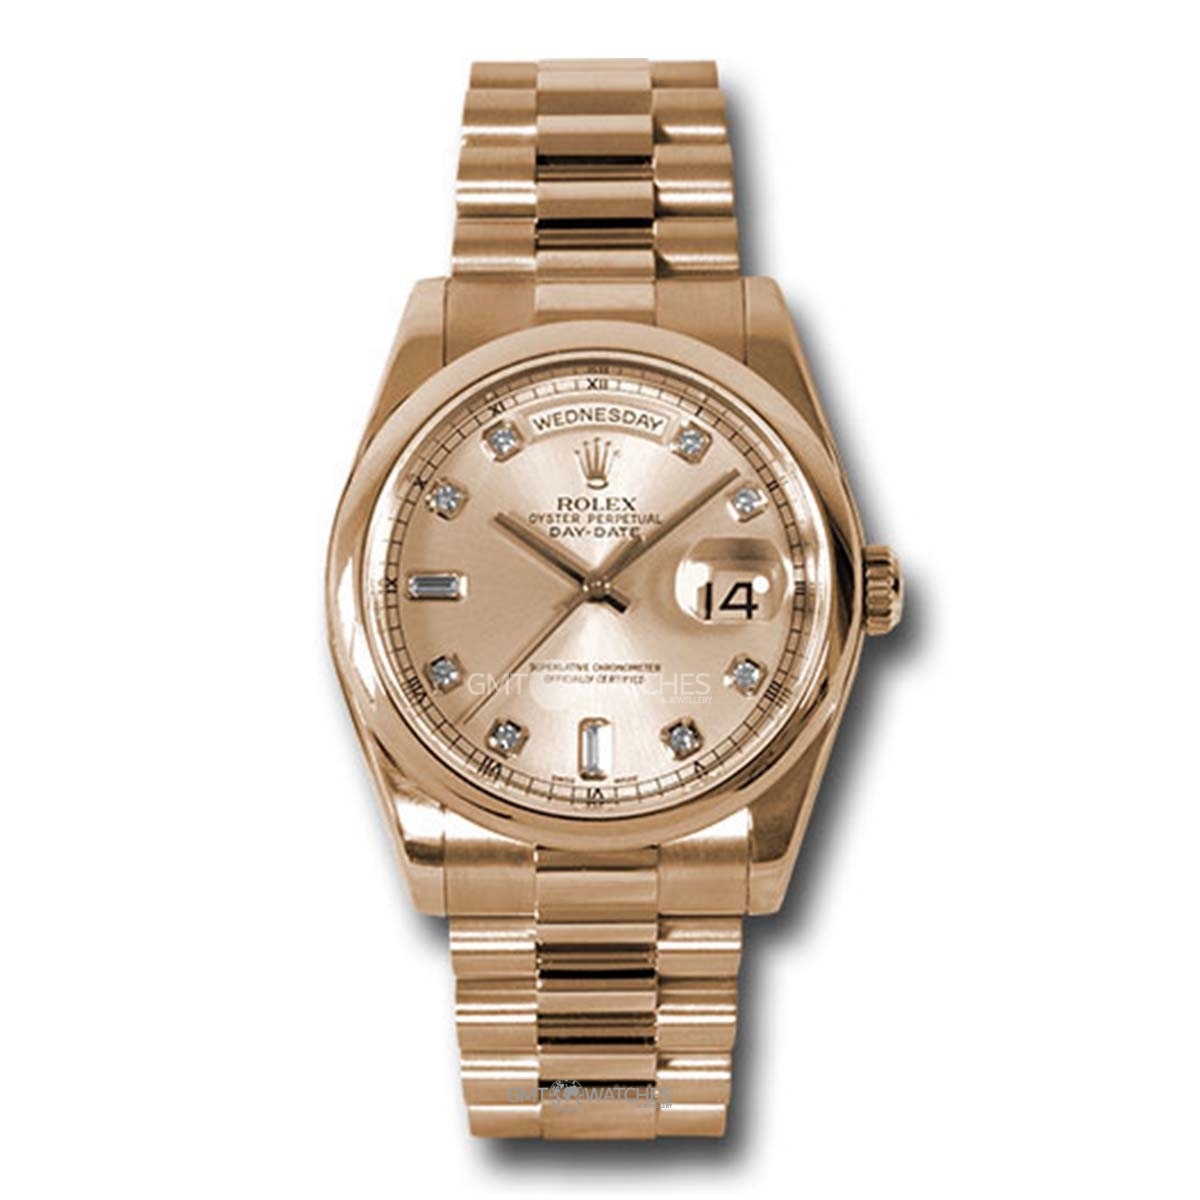 Rolex Oyster Perpetual Day-Date 36mm 18k Rose Gold Smooth Bezel 118205 chdp